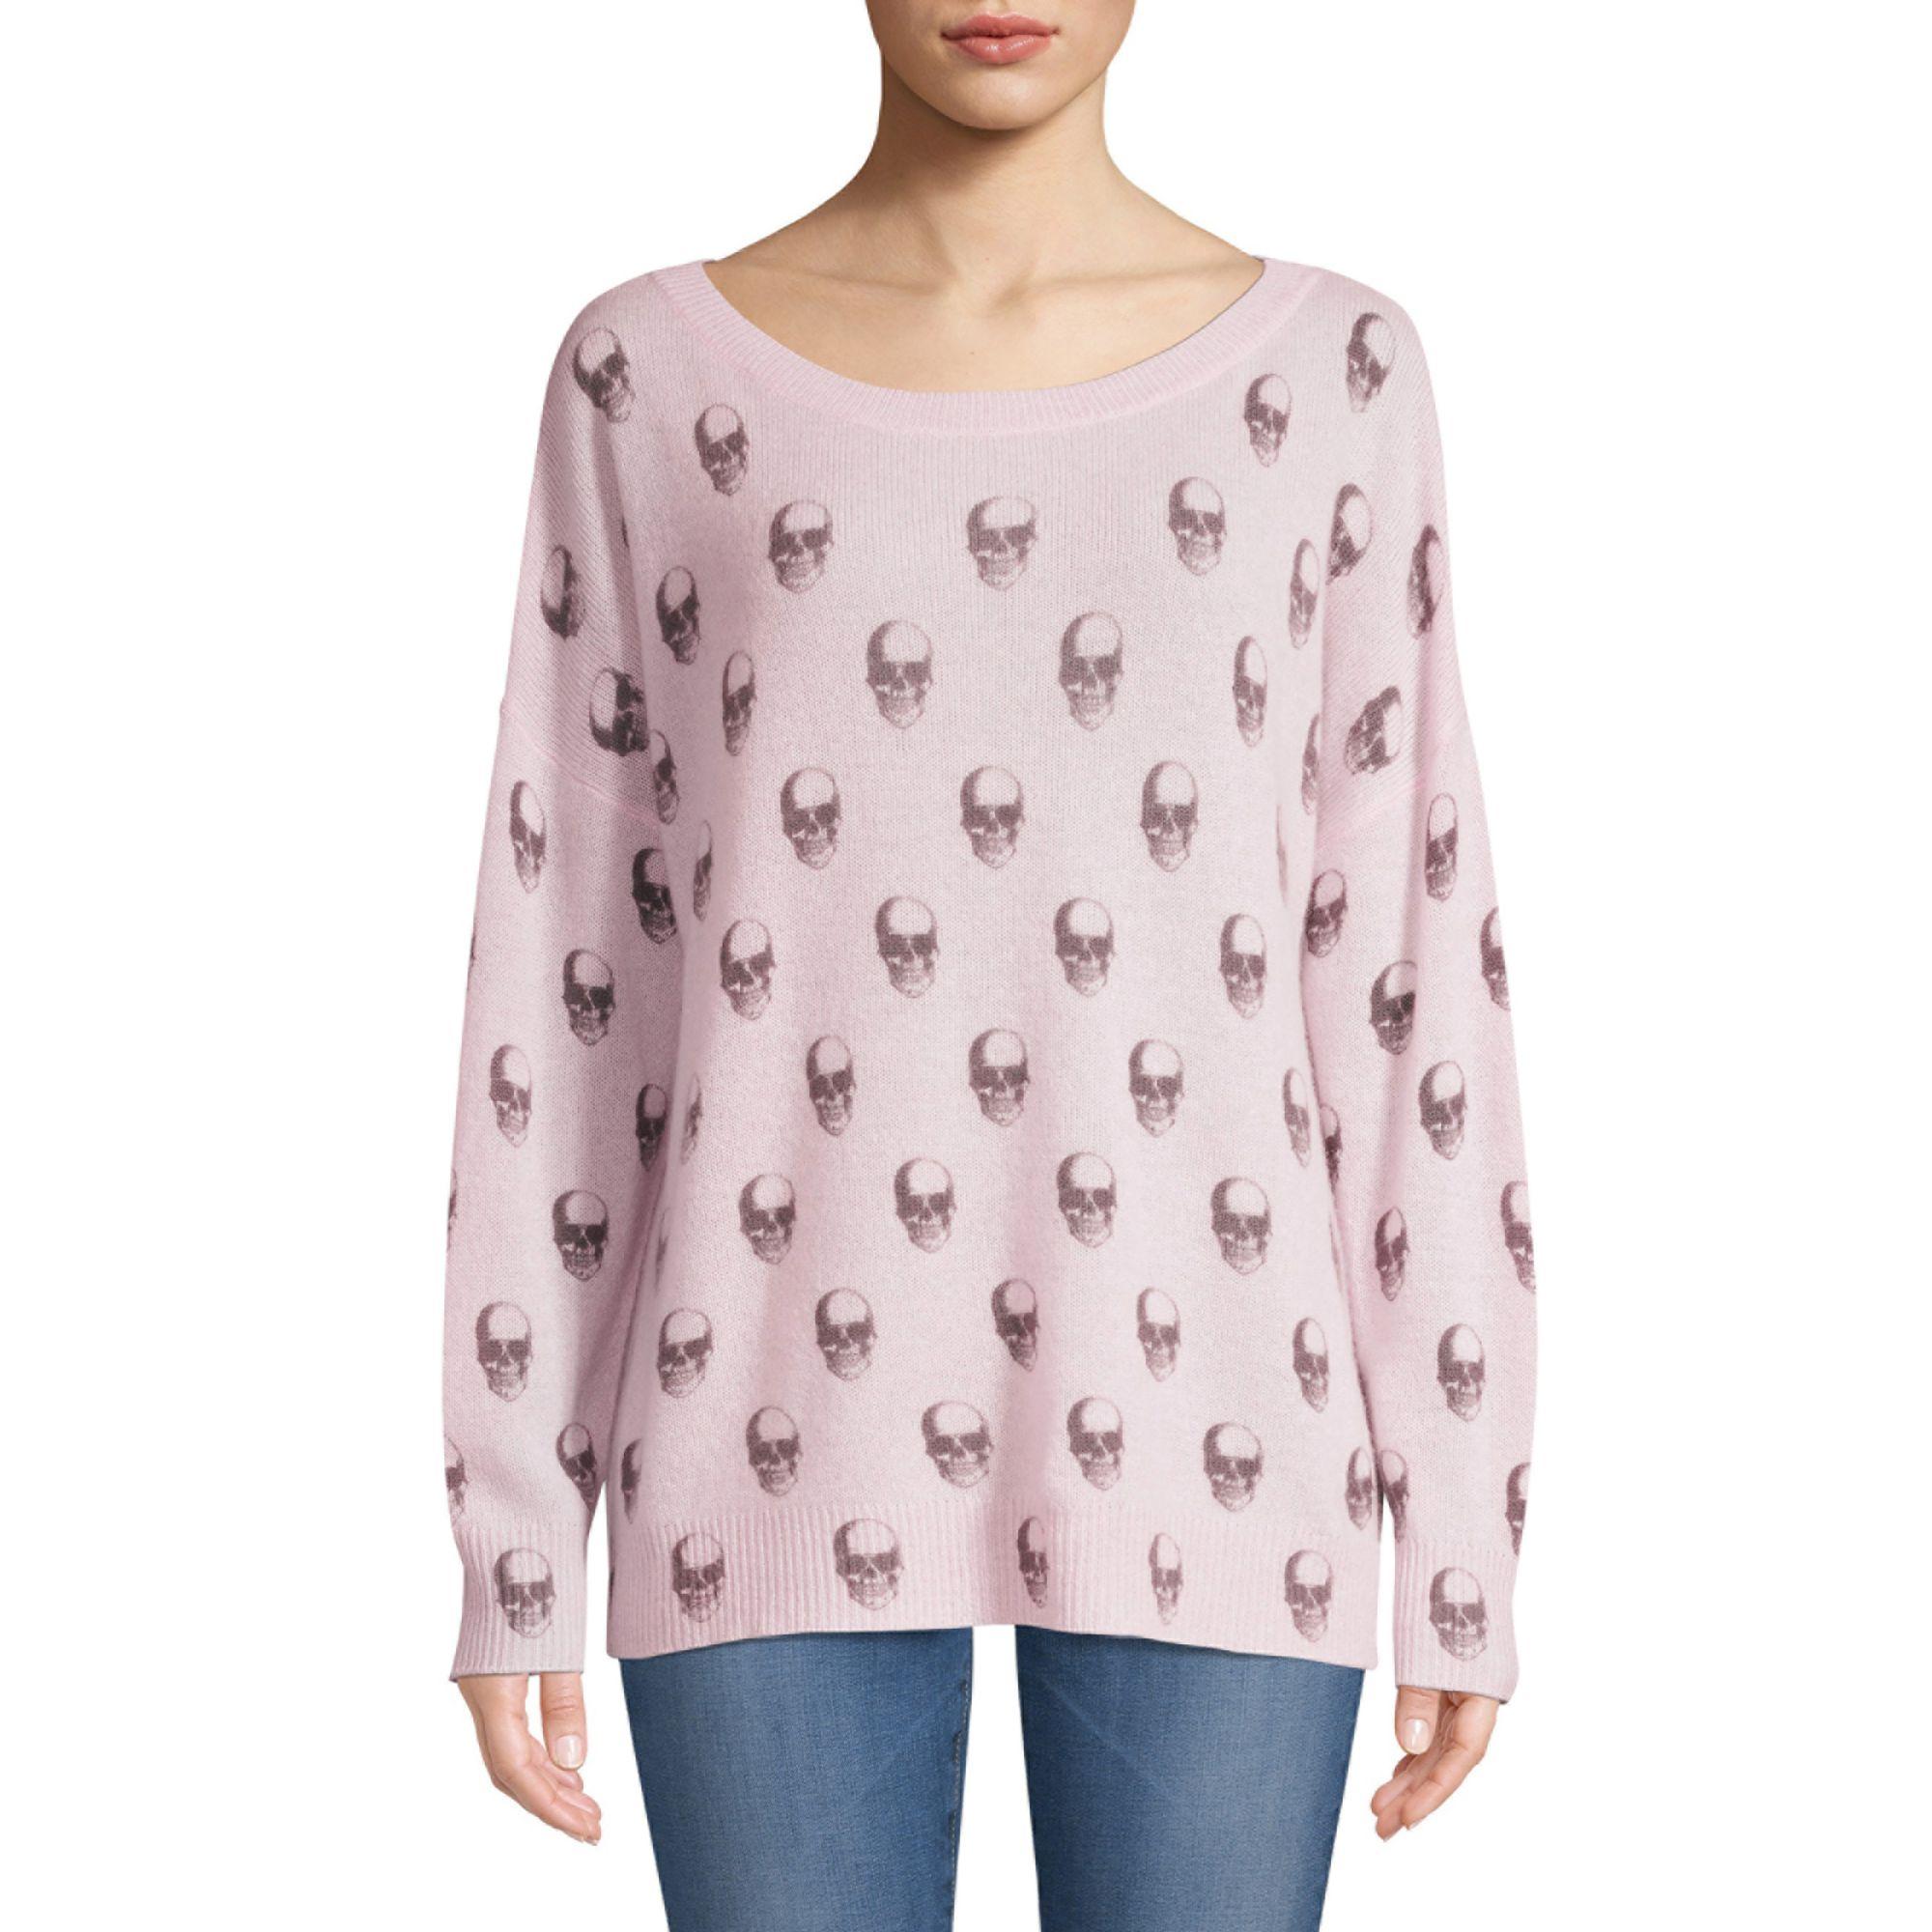 360cashmere Jolie Cashmere Skull Print Sweater in Pink | Lyst